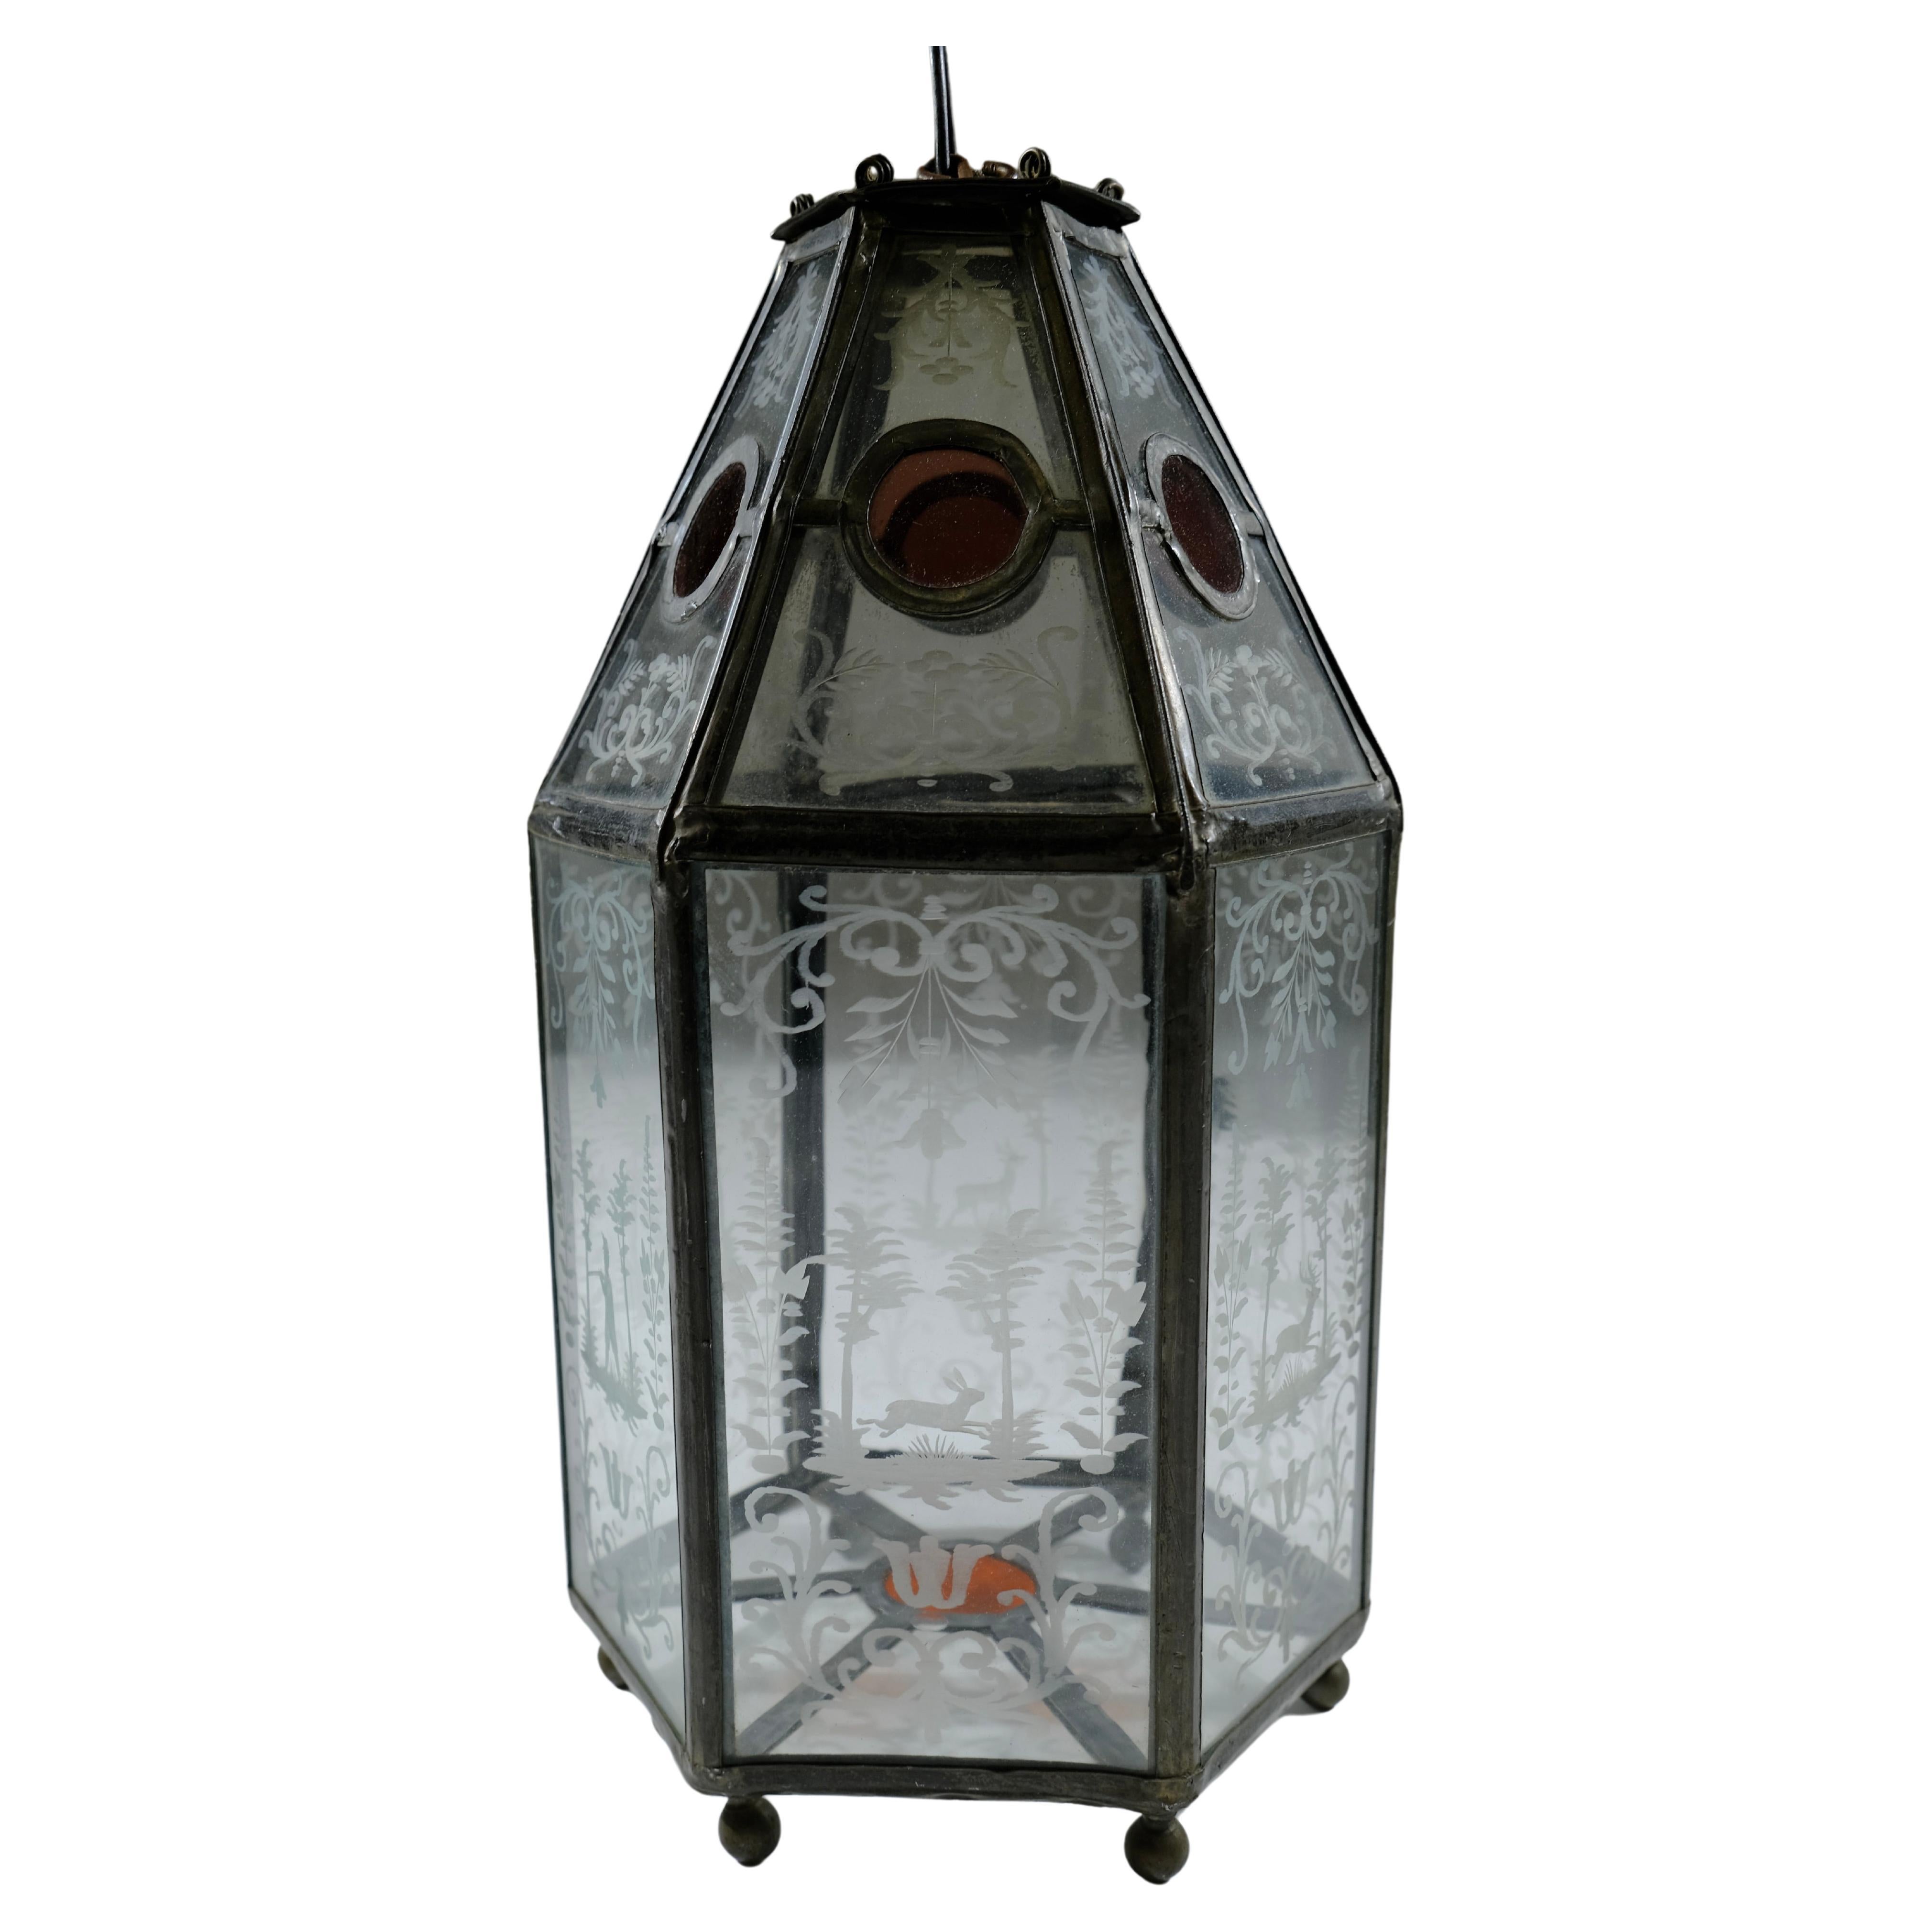  A unusual lantern from the 19th c. The frame is made of lead and the glass-plates have engraved motives of different animals and a hunter. Its unusual to find a lantern like this where all glass is whole and not cracked.